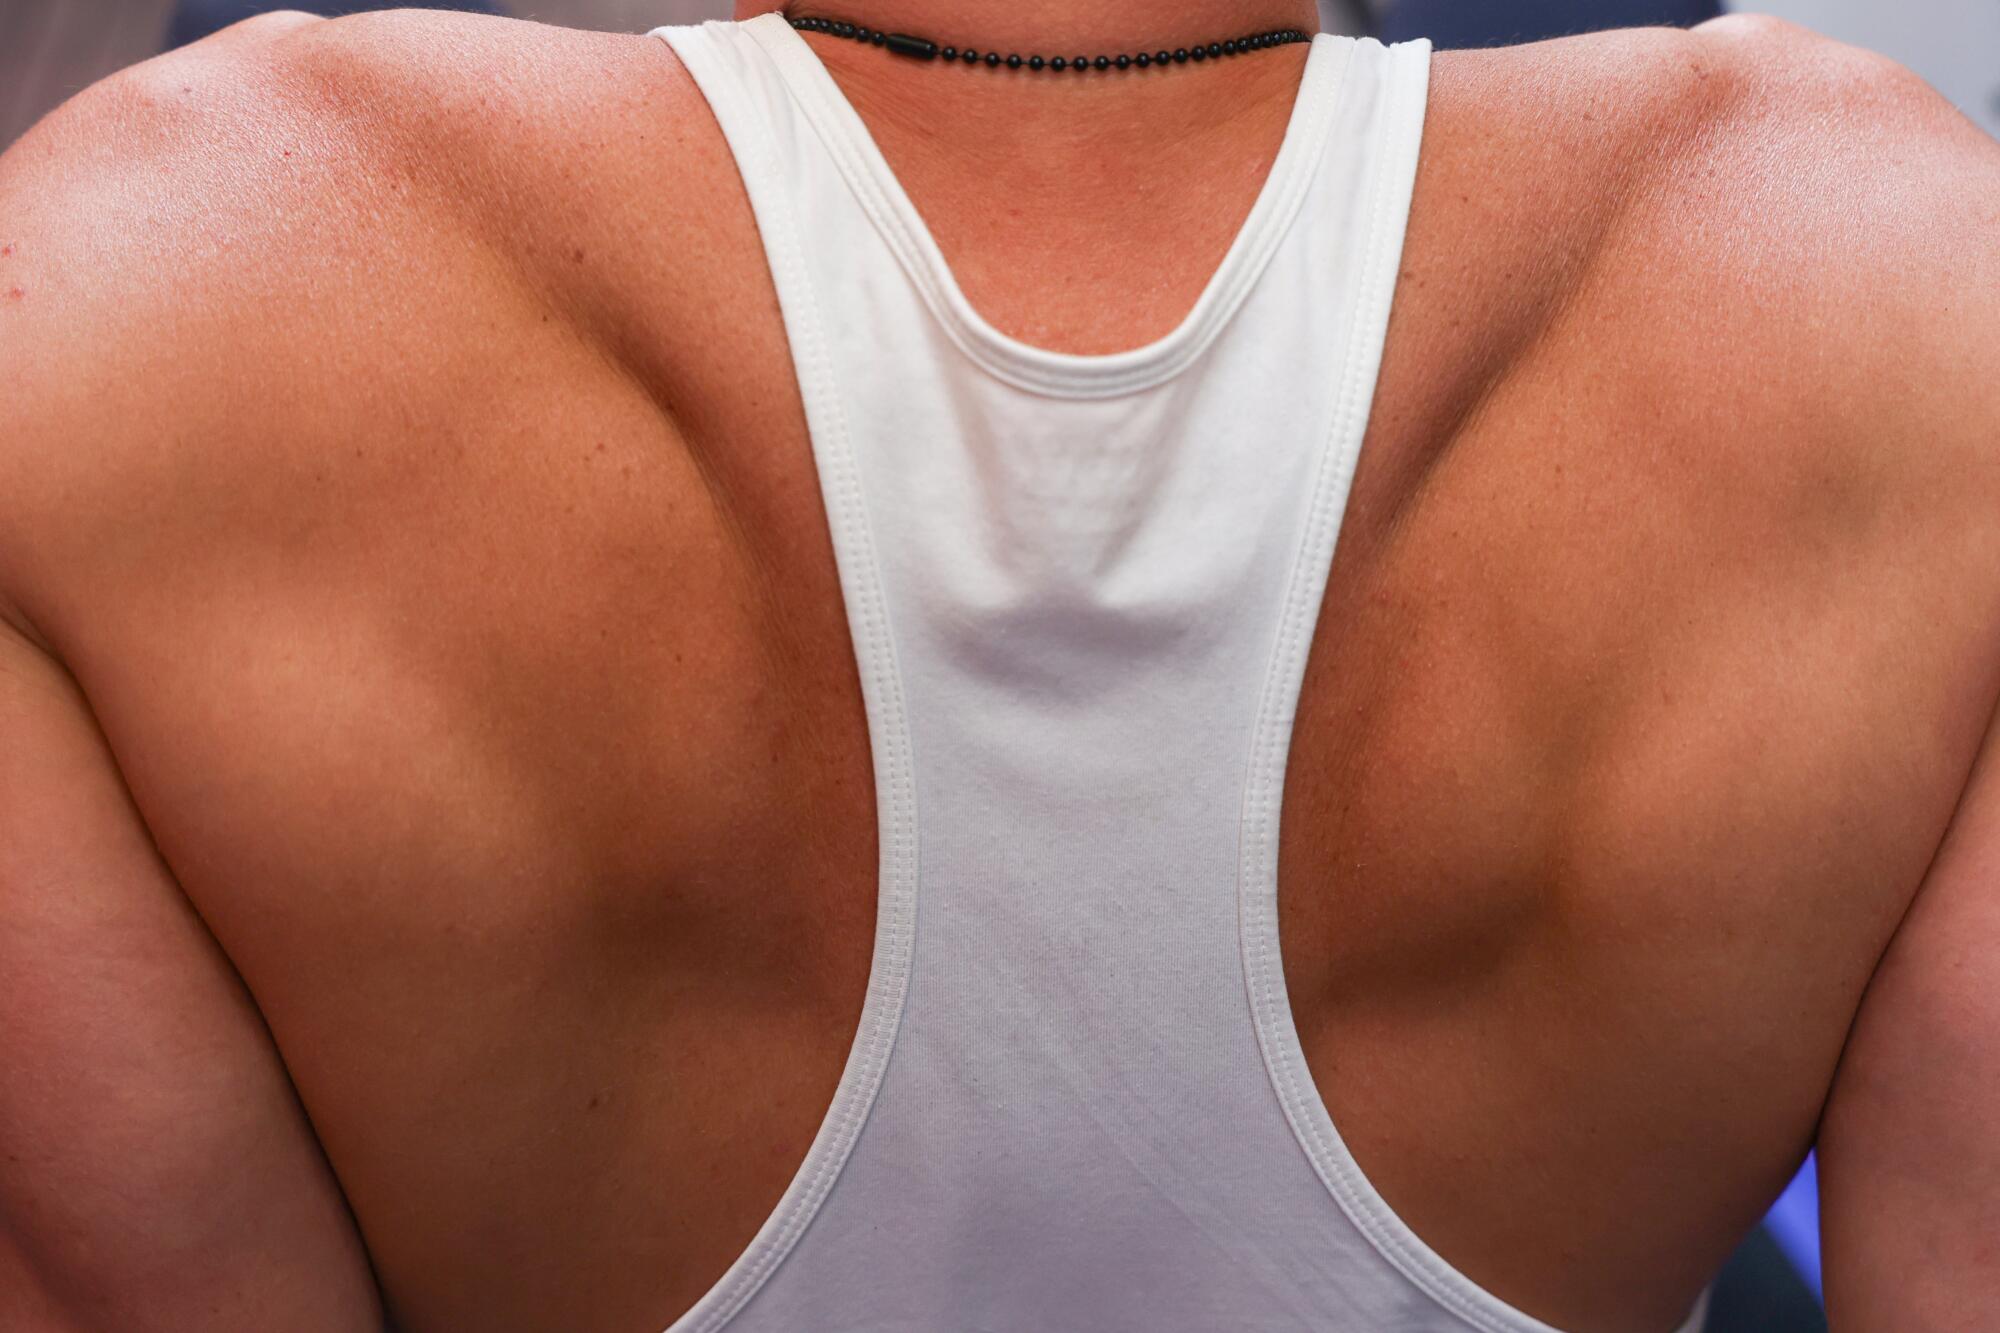 The back and shoulders of a person in a white tank top